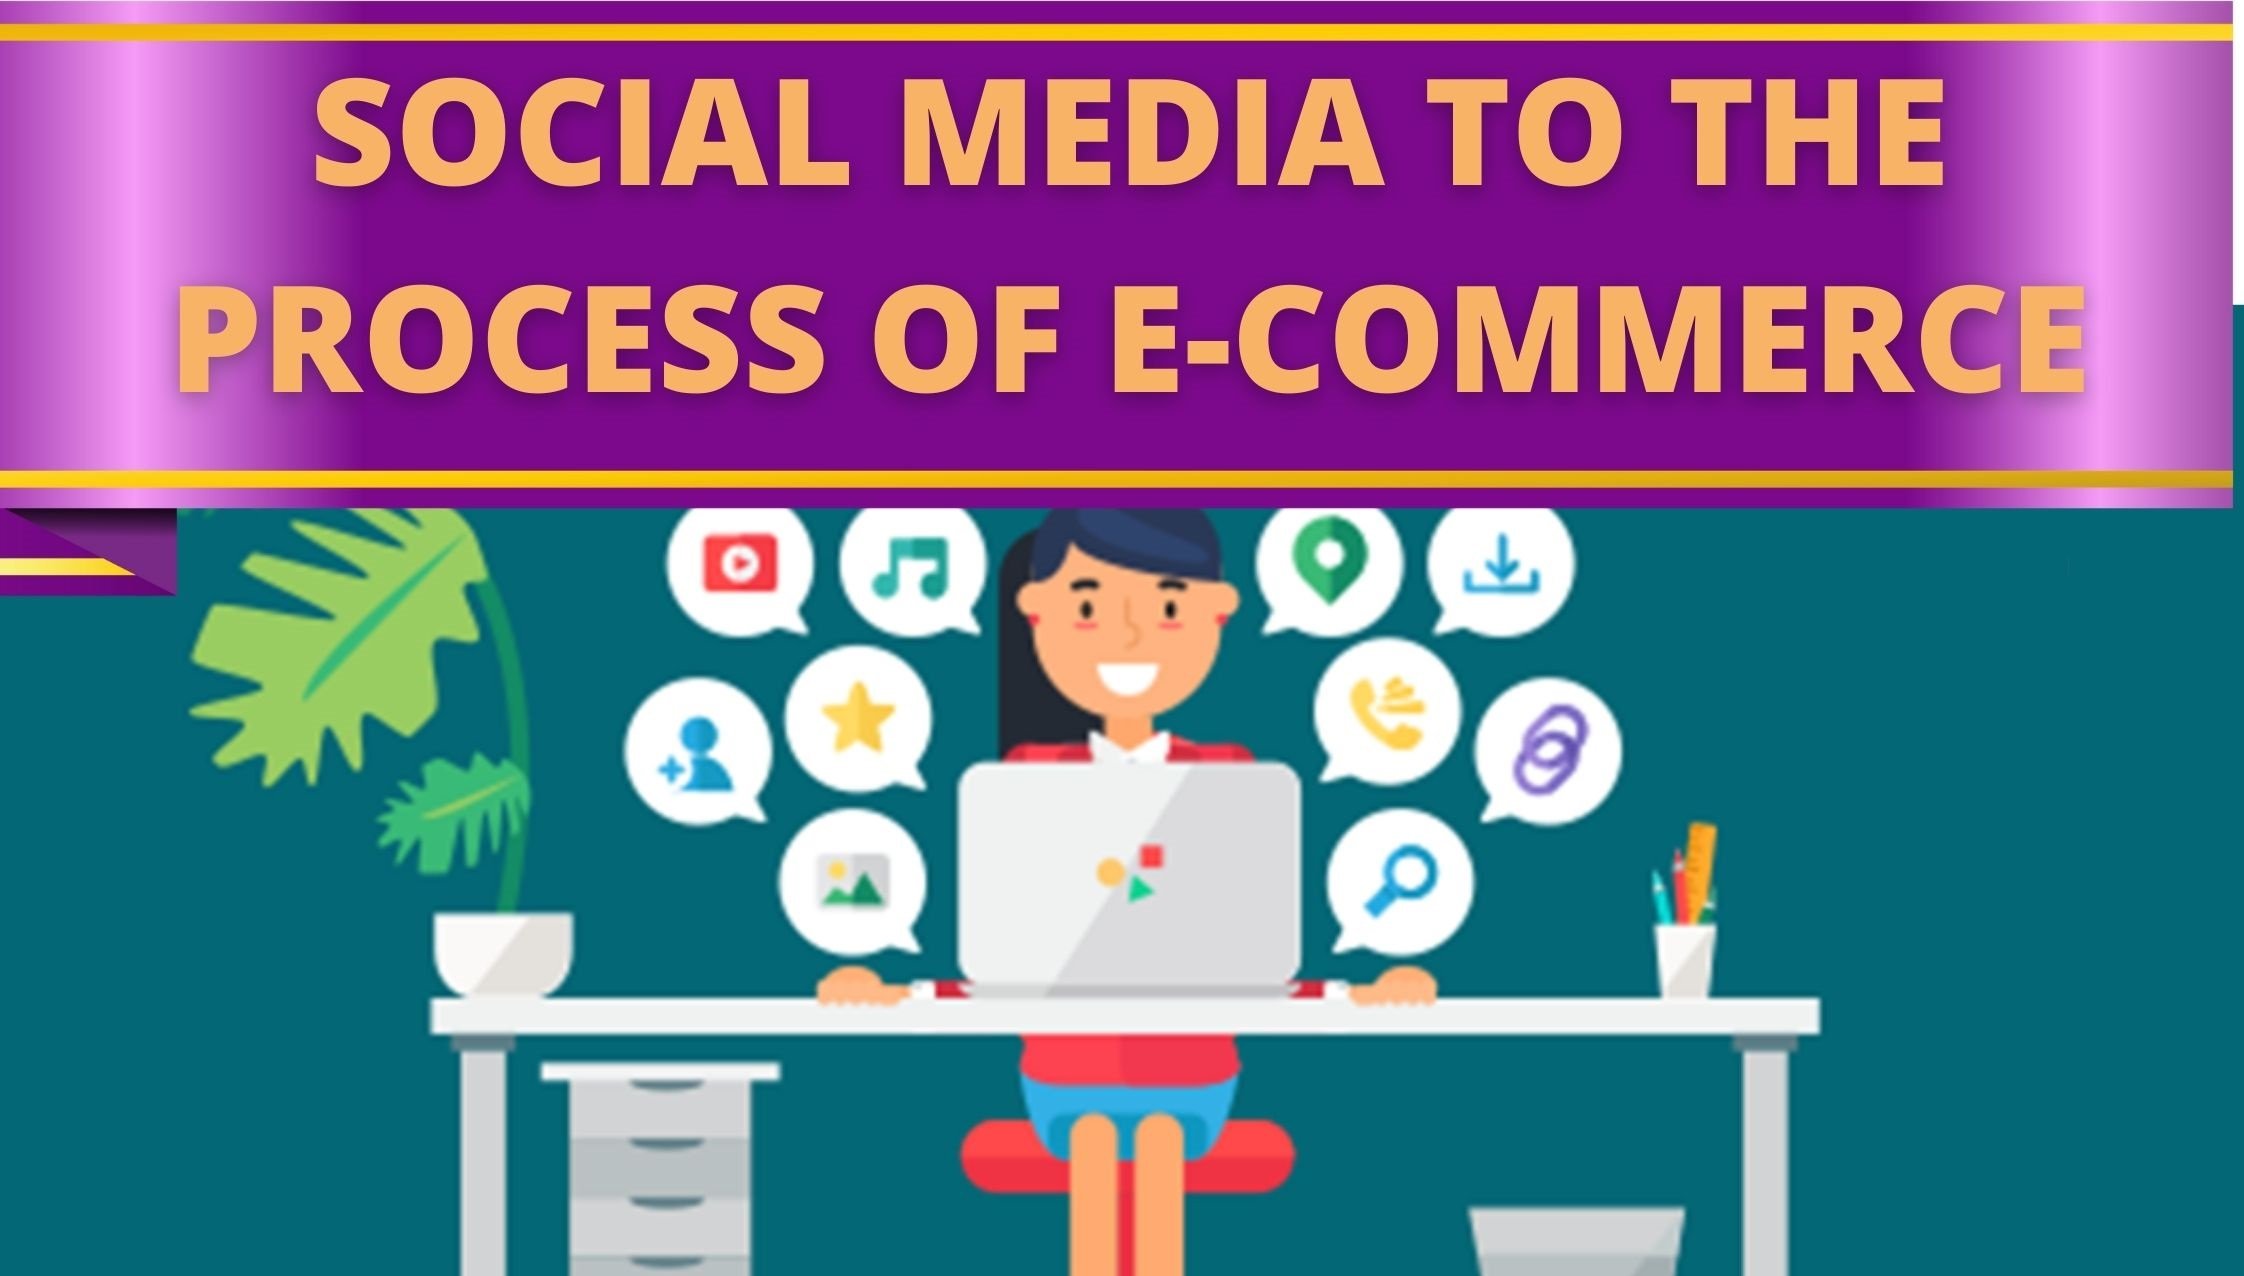 HOW EFFECTIVE IS SOCIAL MEDIA TO THE PROCESS OF E-COMMERCE?